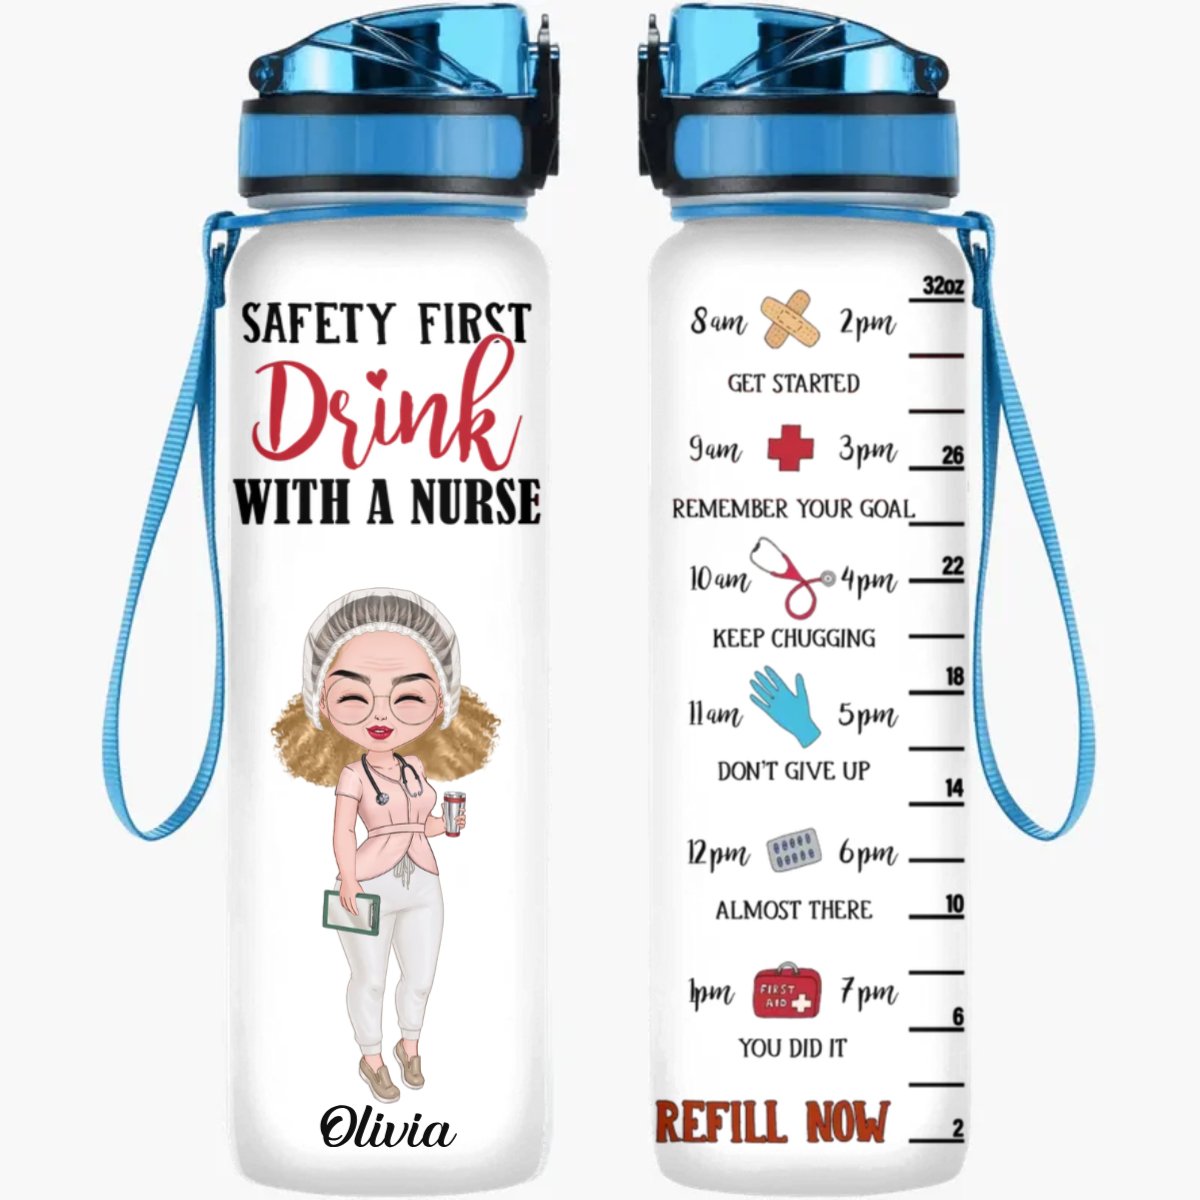 Nurse - Safety First Drink With A Nurse - Personalized Water Tracker Bottle - The Next Custom Gift